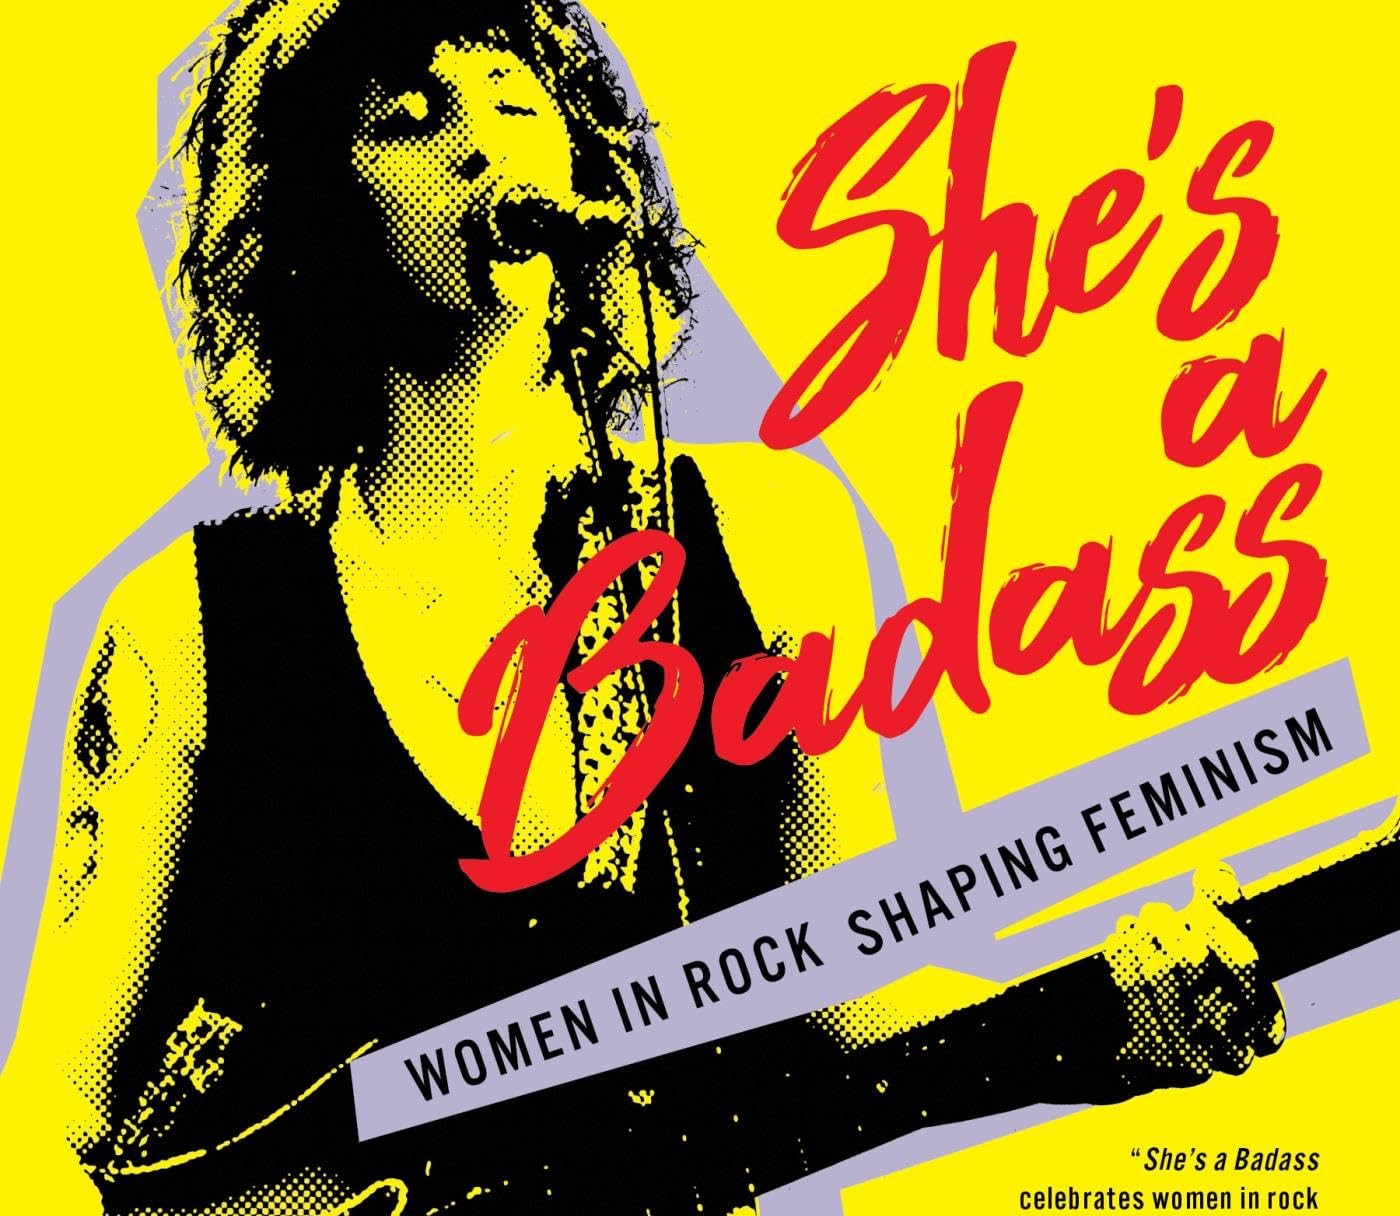 She's a Badass: Women in Rock Shaping Feminism  Katherine Yeske Taylor -  It's Psychedelic Baby Magazine